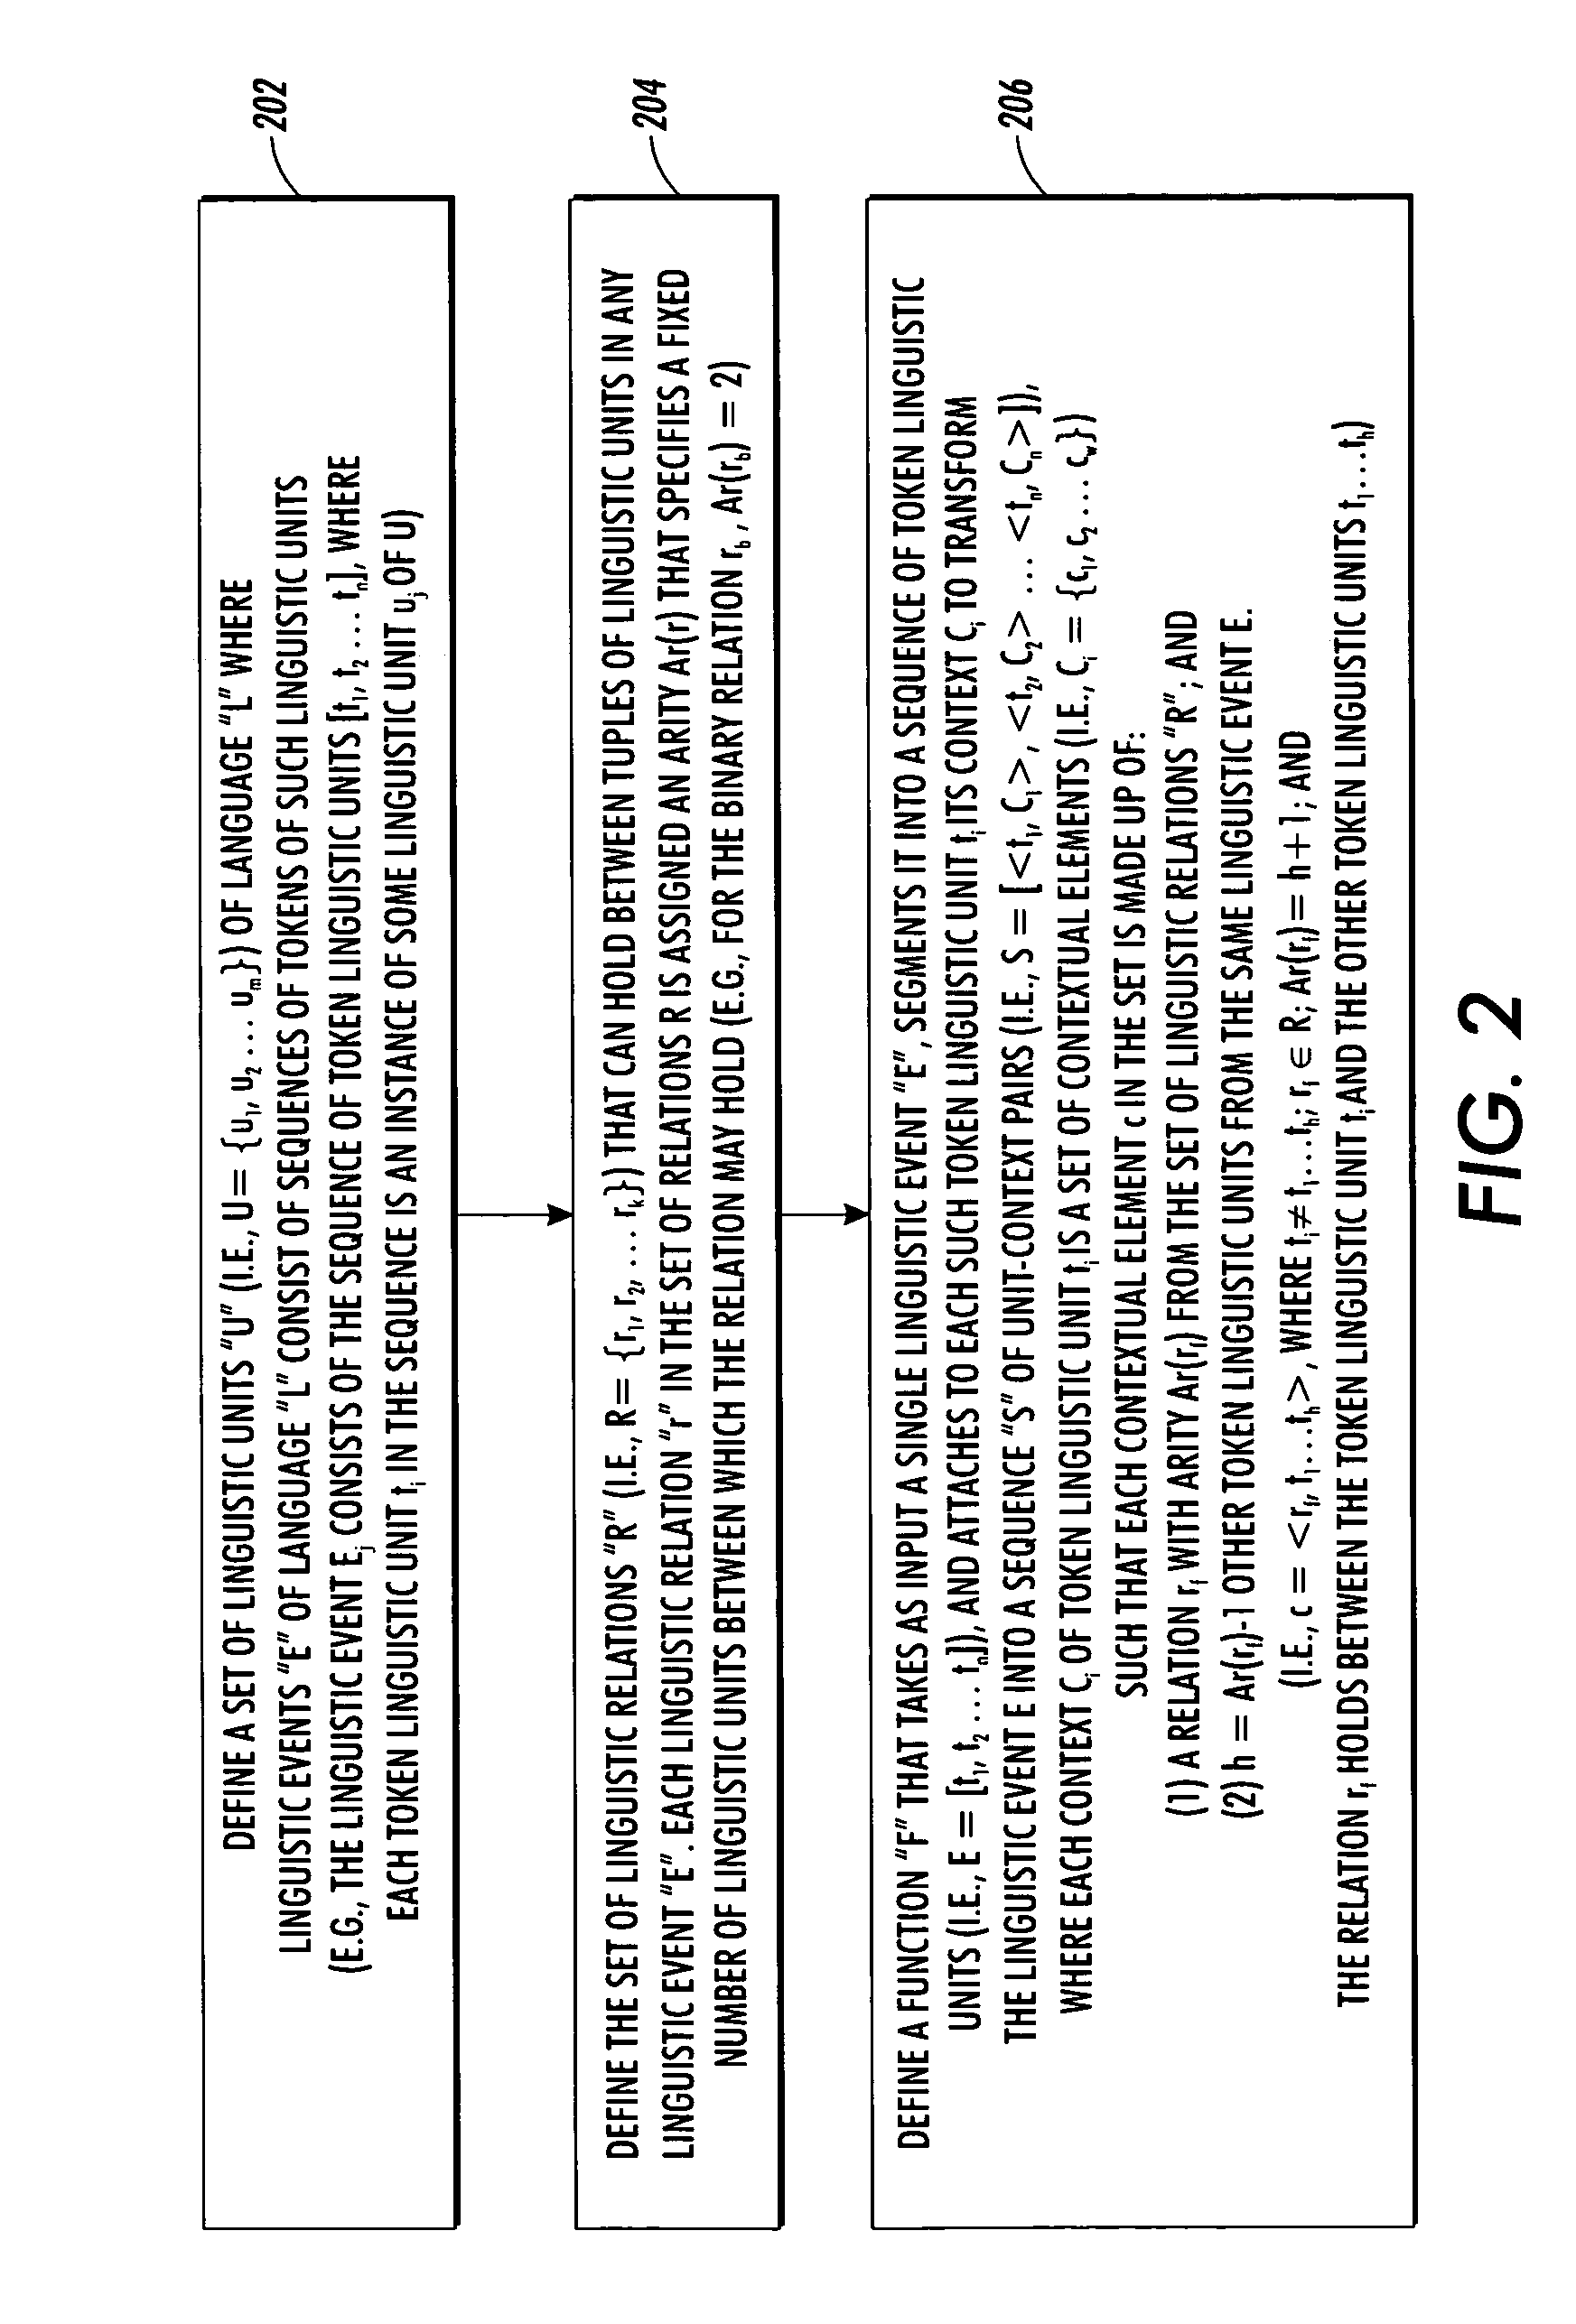 System and method for detecting and decoding semantically encoded natural language messages